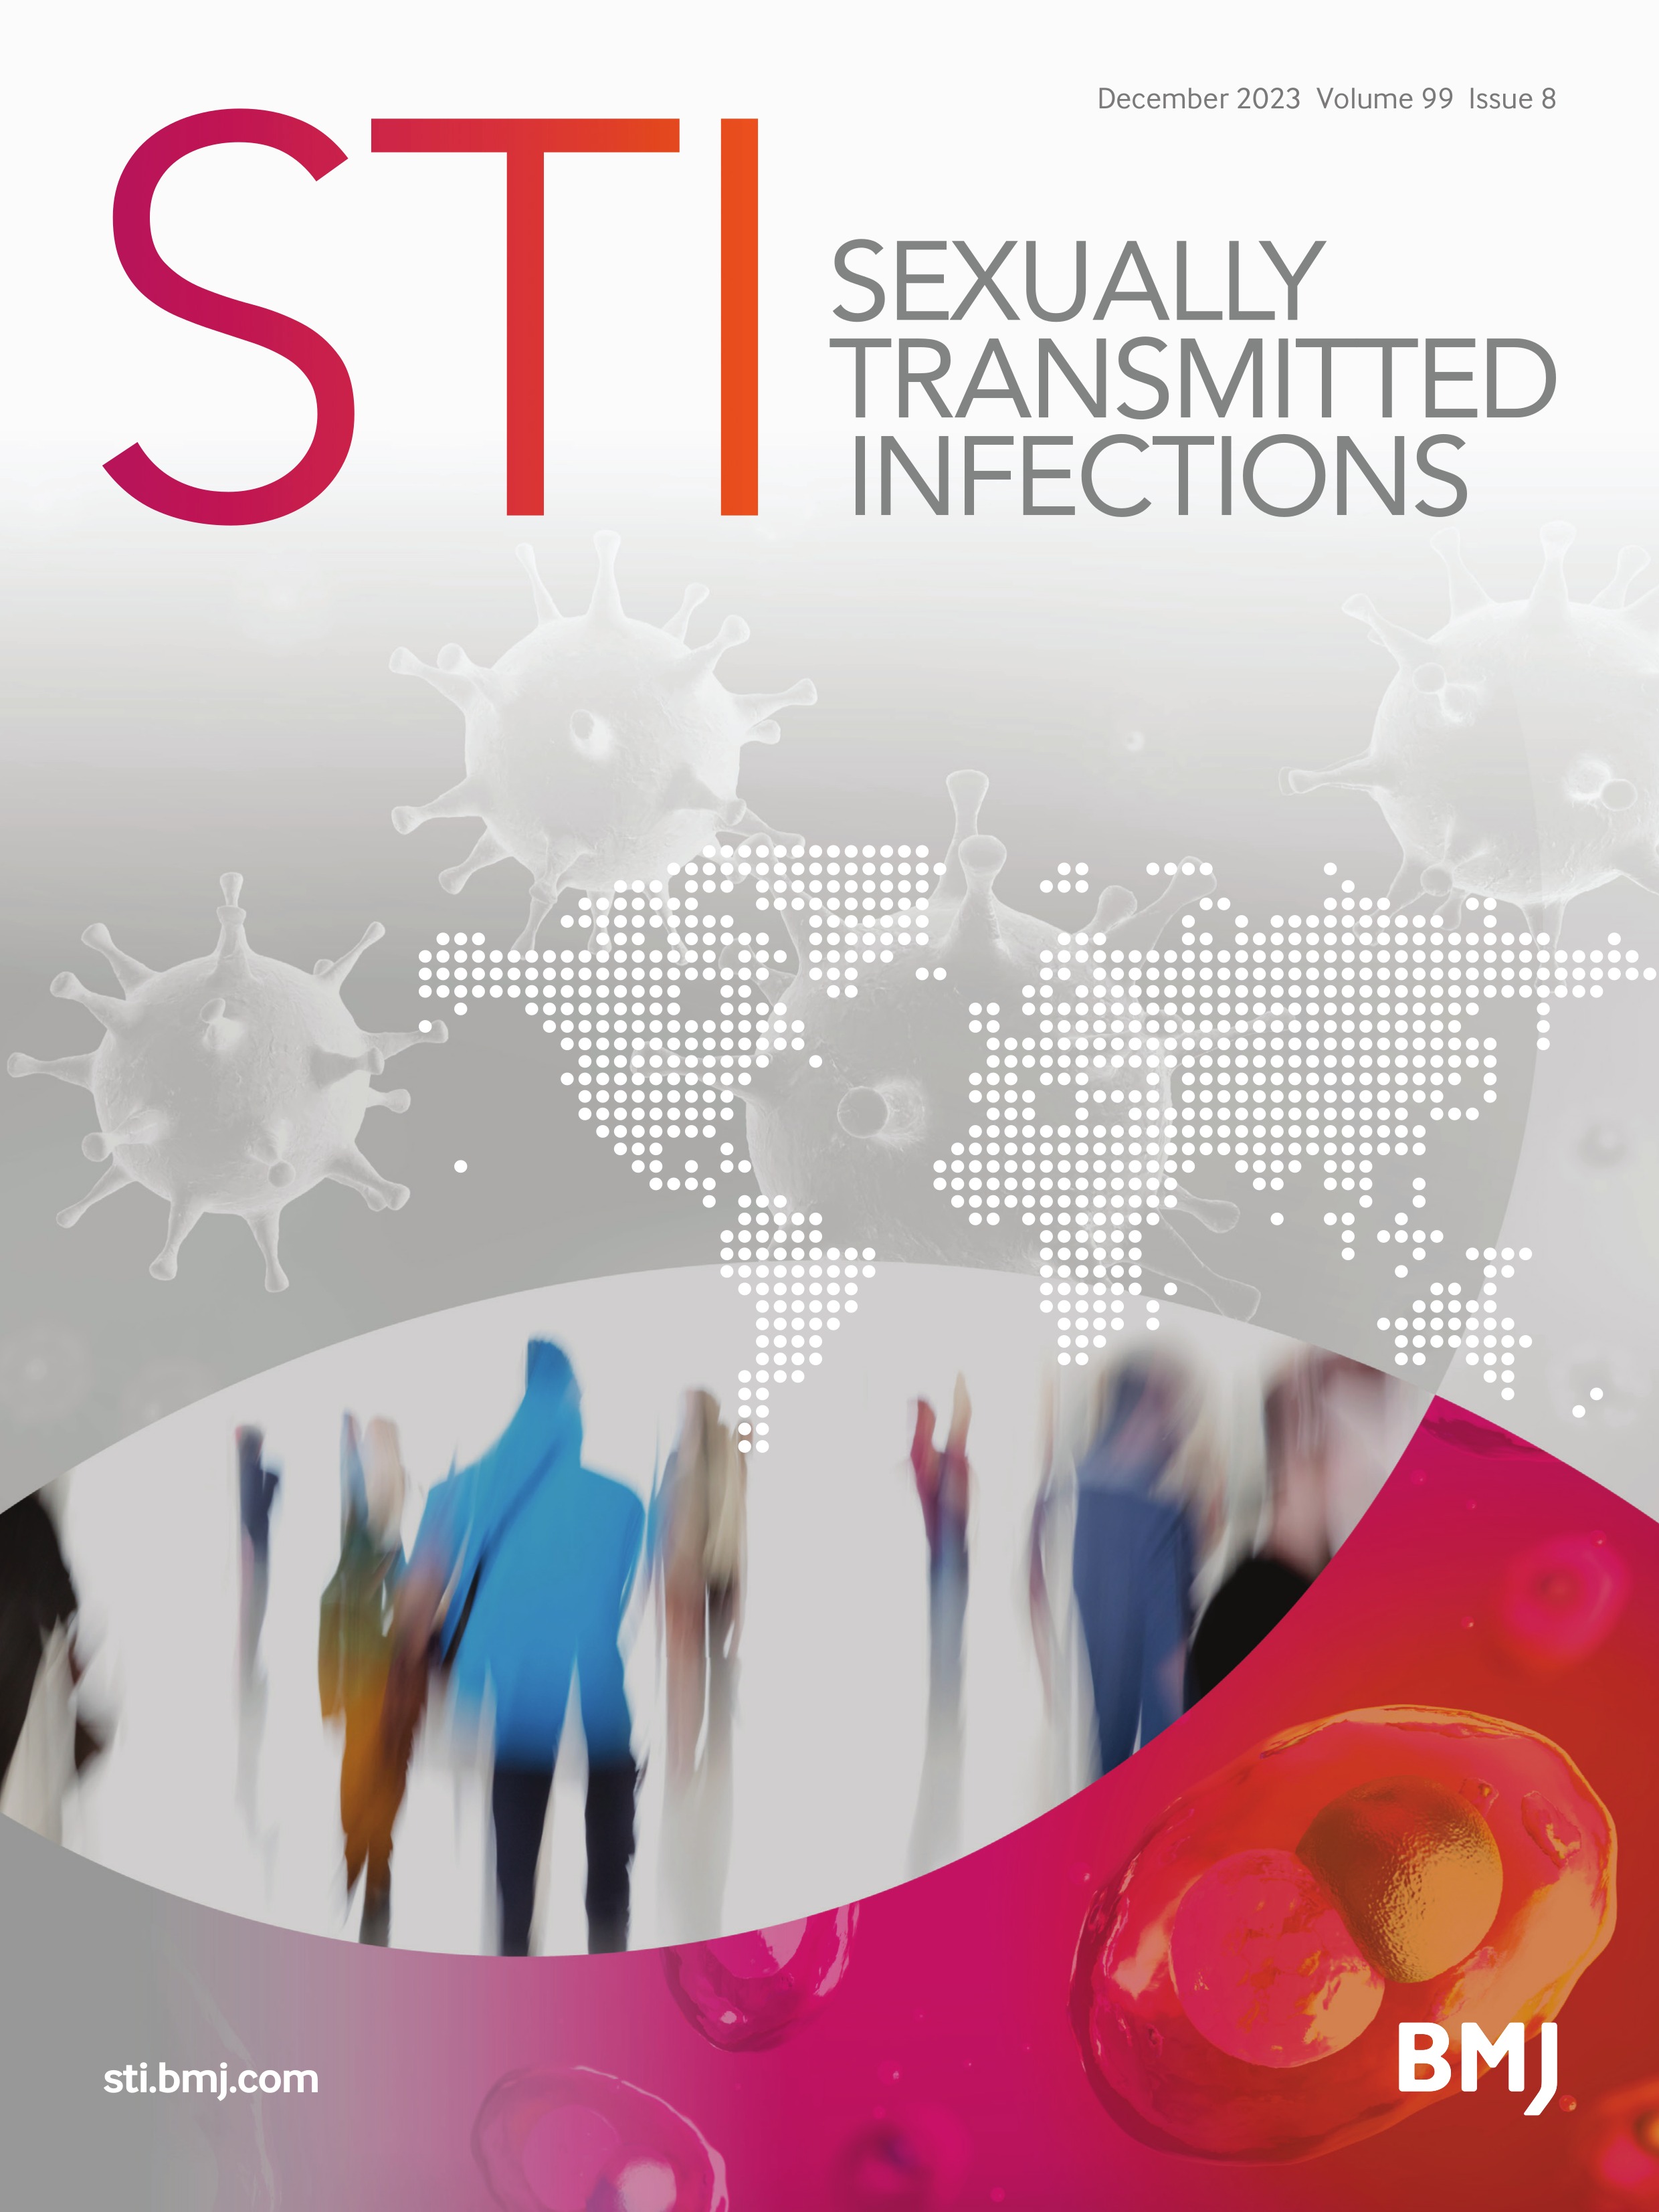 Differential uptake and effects of digital sexually transmitted and bloodborne infection testing interventions among equity-seeking groups: a scoping review